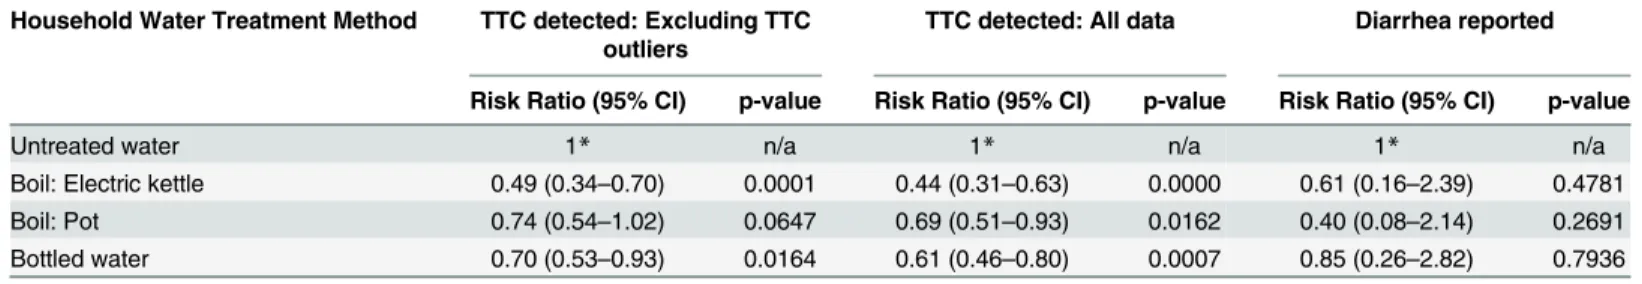 Table 5. Risk ratios for TTC and diarrhea by HWT method.